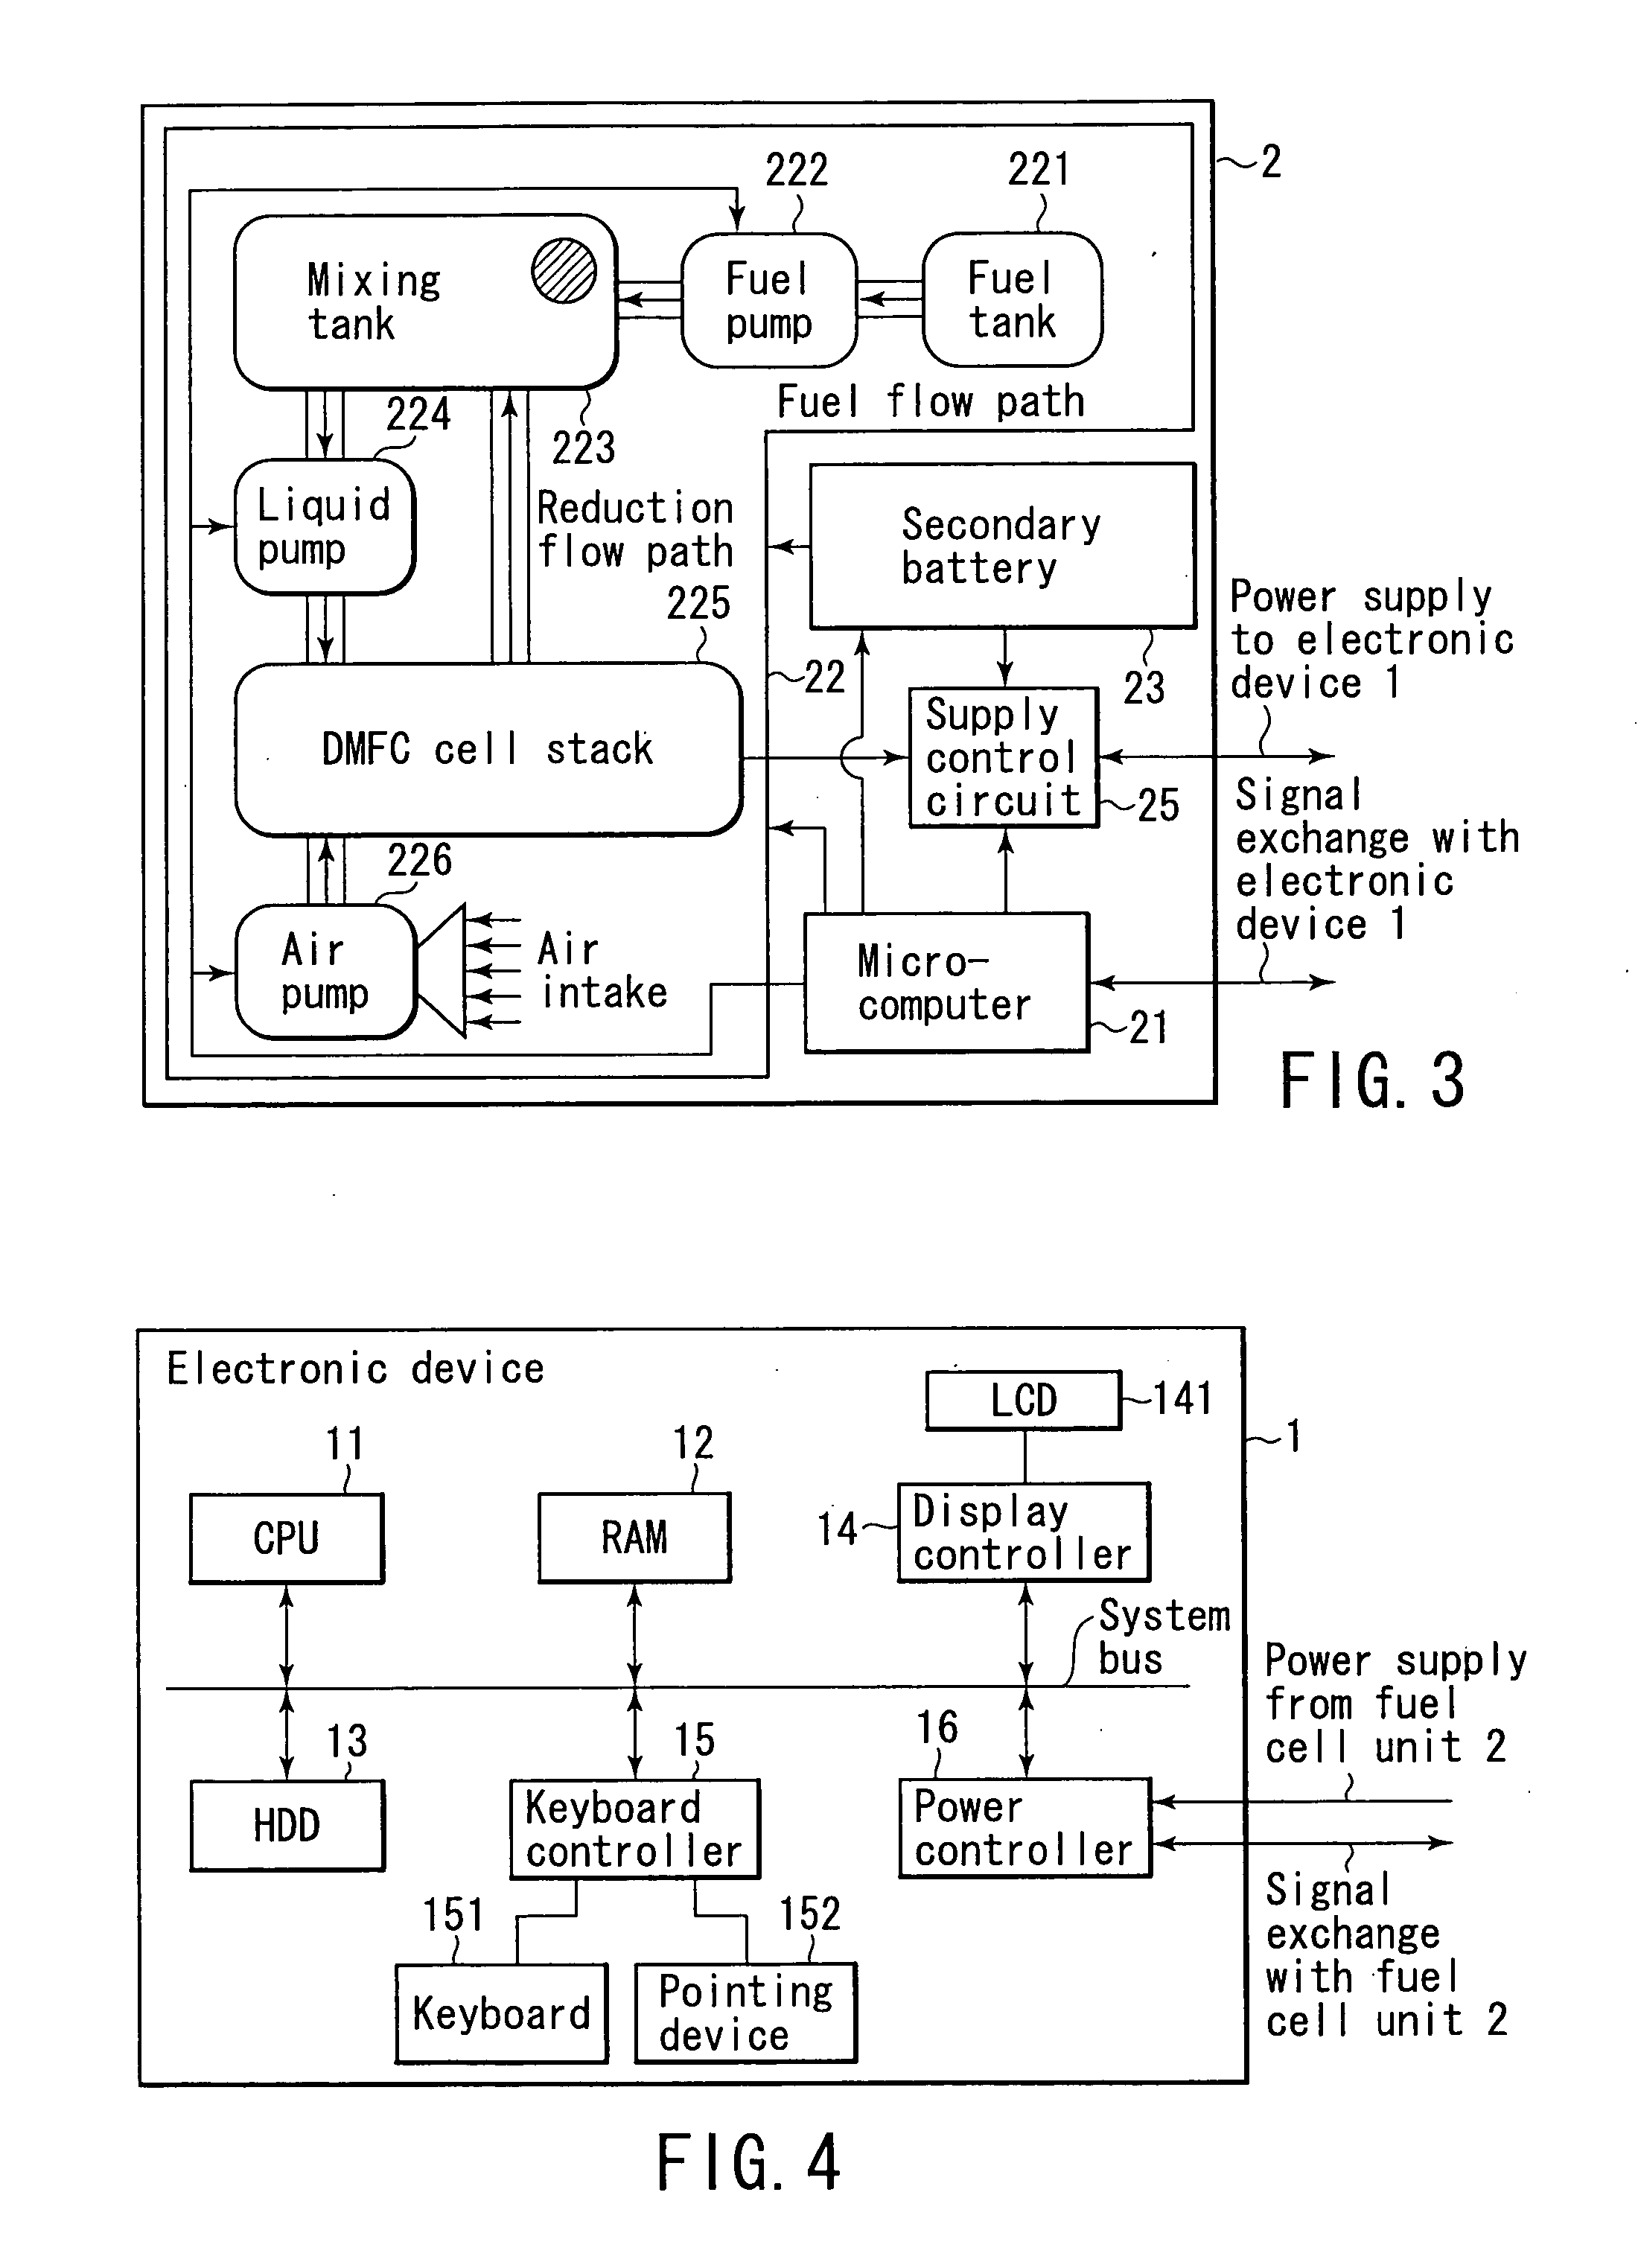 Cell unit and power supply control method